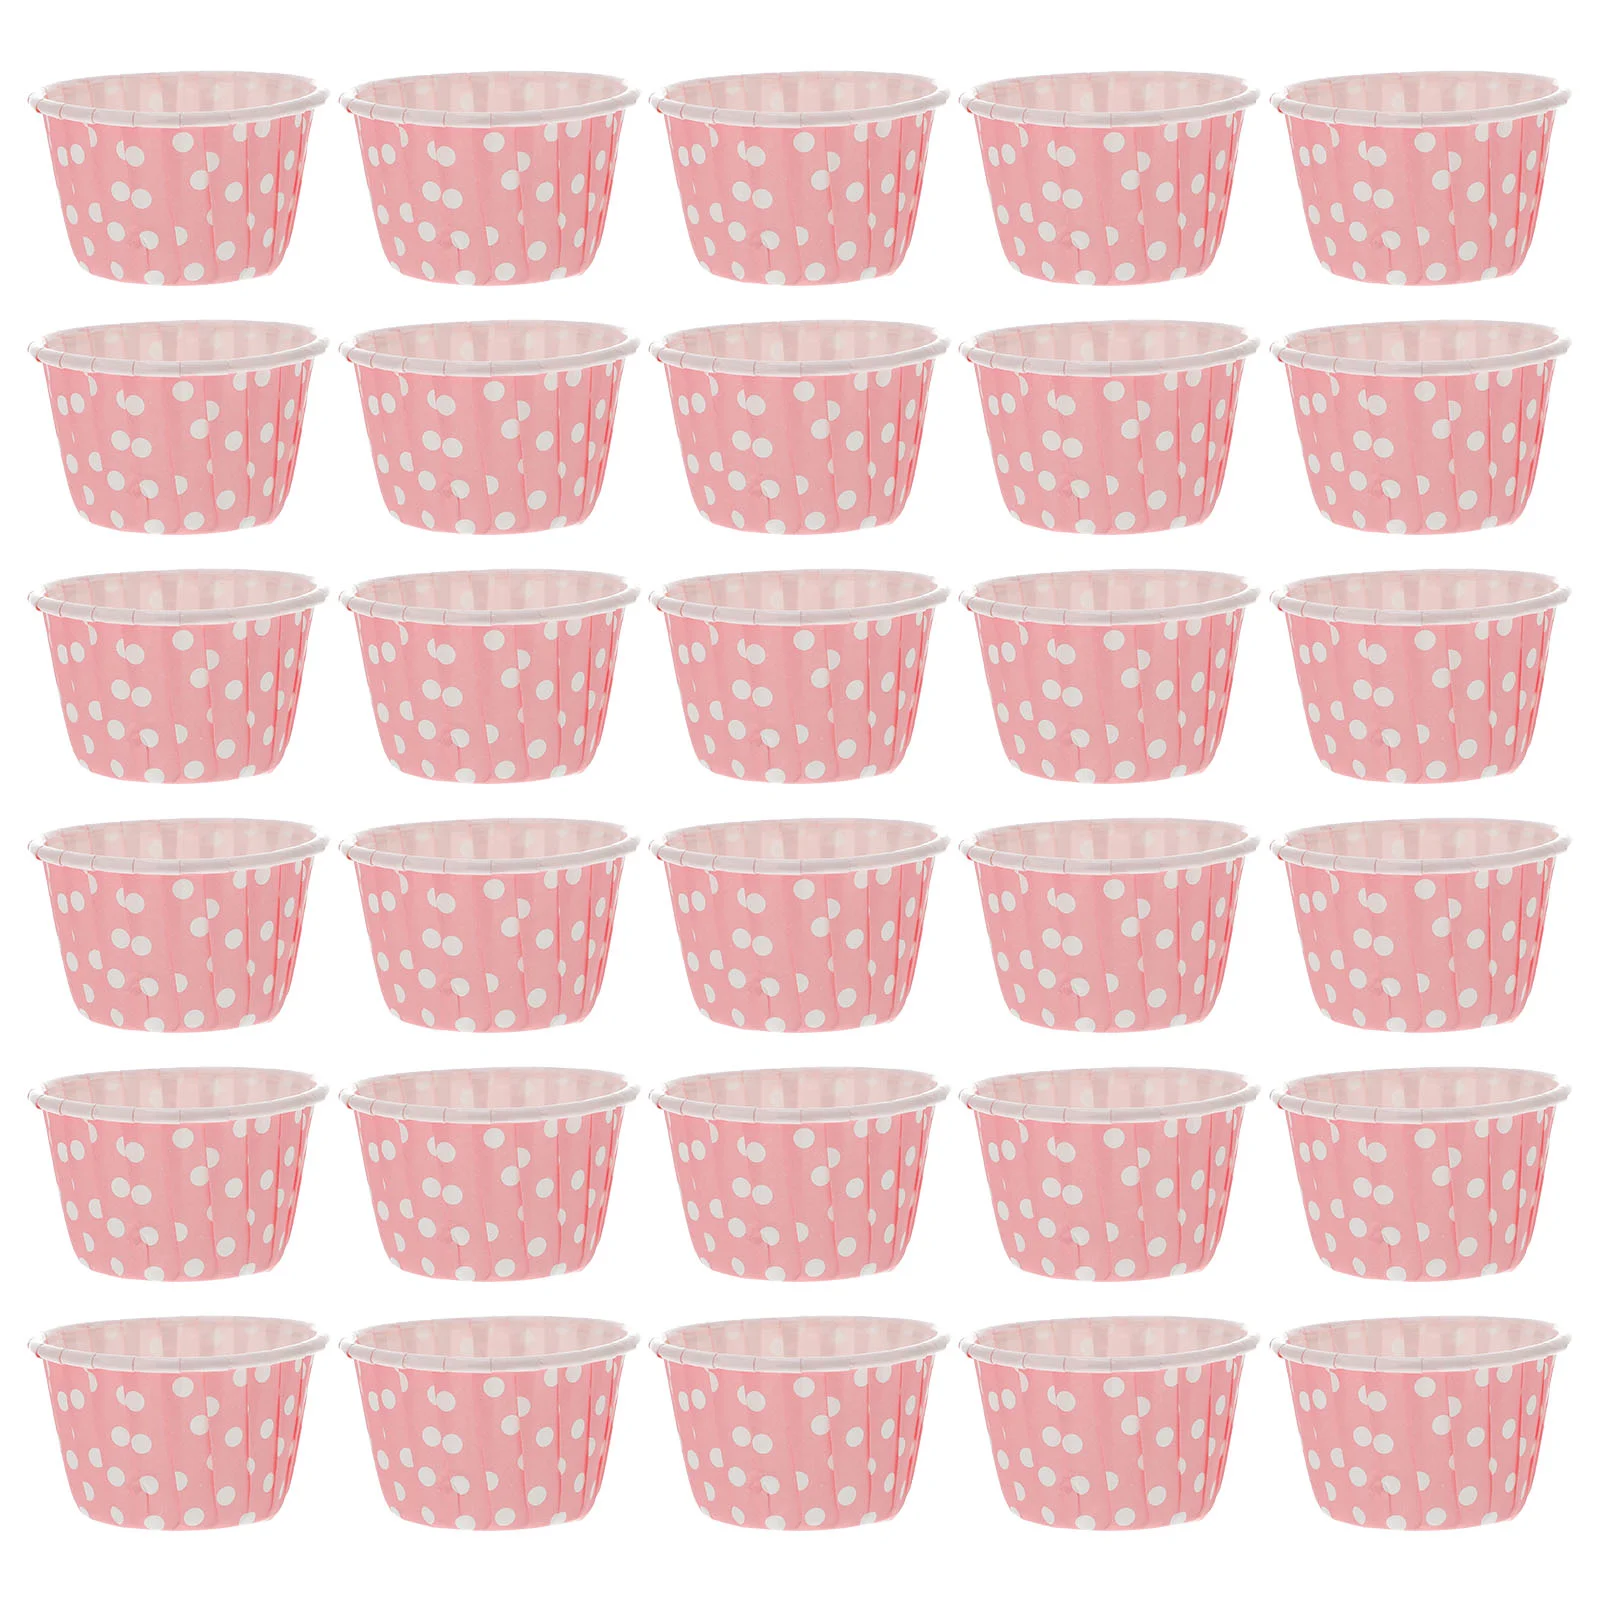 

50 Pcs Ice Cream Cups Cupcake Liners Yogurt Bowl Containers Lids Disposable Go Bowls Soup Paper Sundae Food